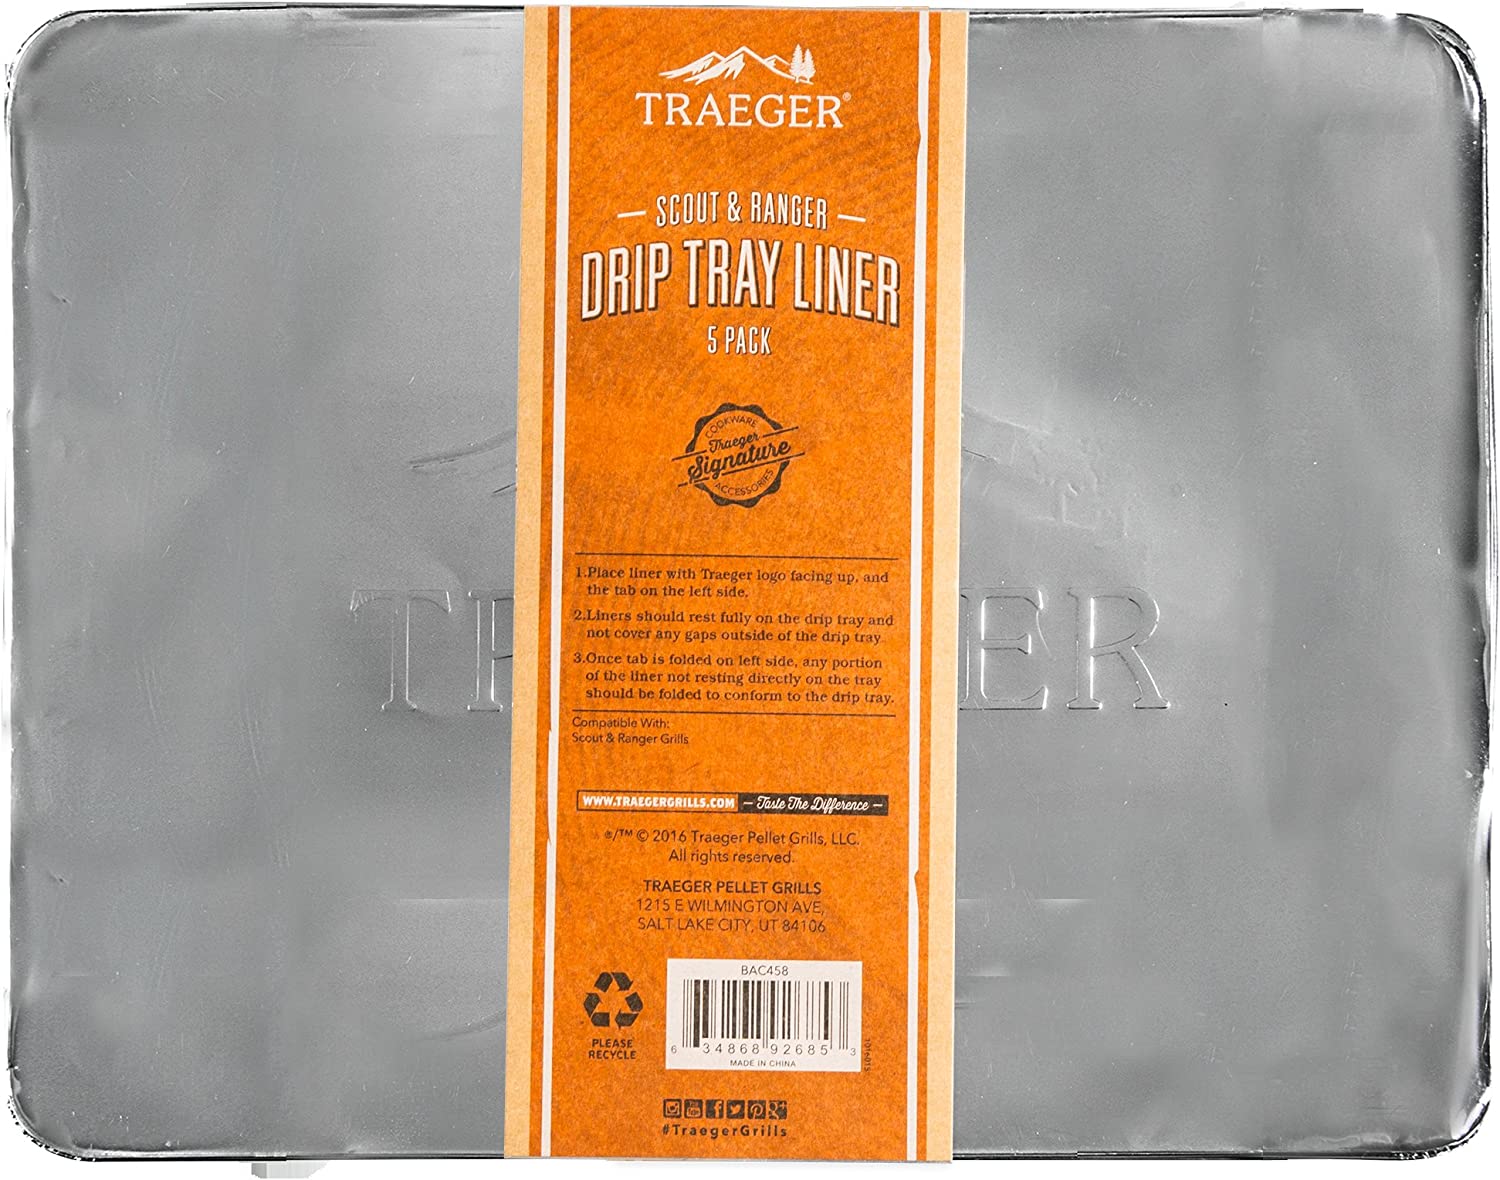 Traeger Drip Tray Liners- 5 Pack Ranger and Scout Grill